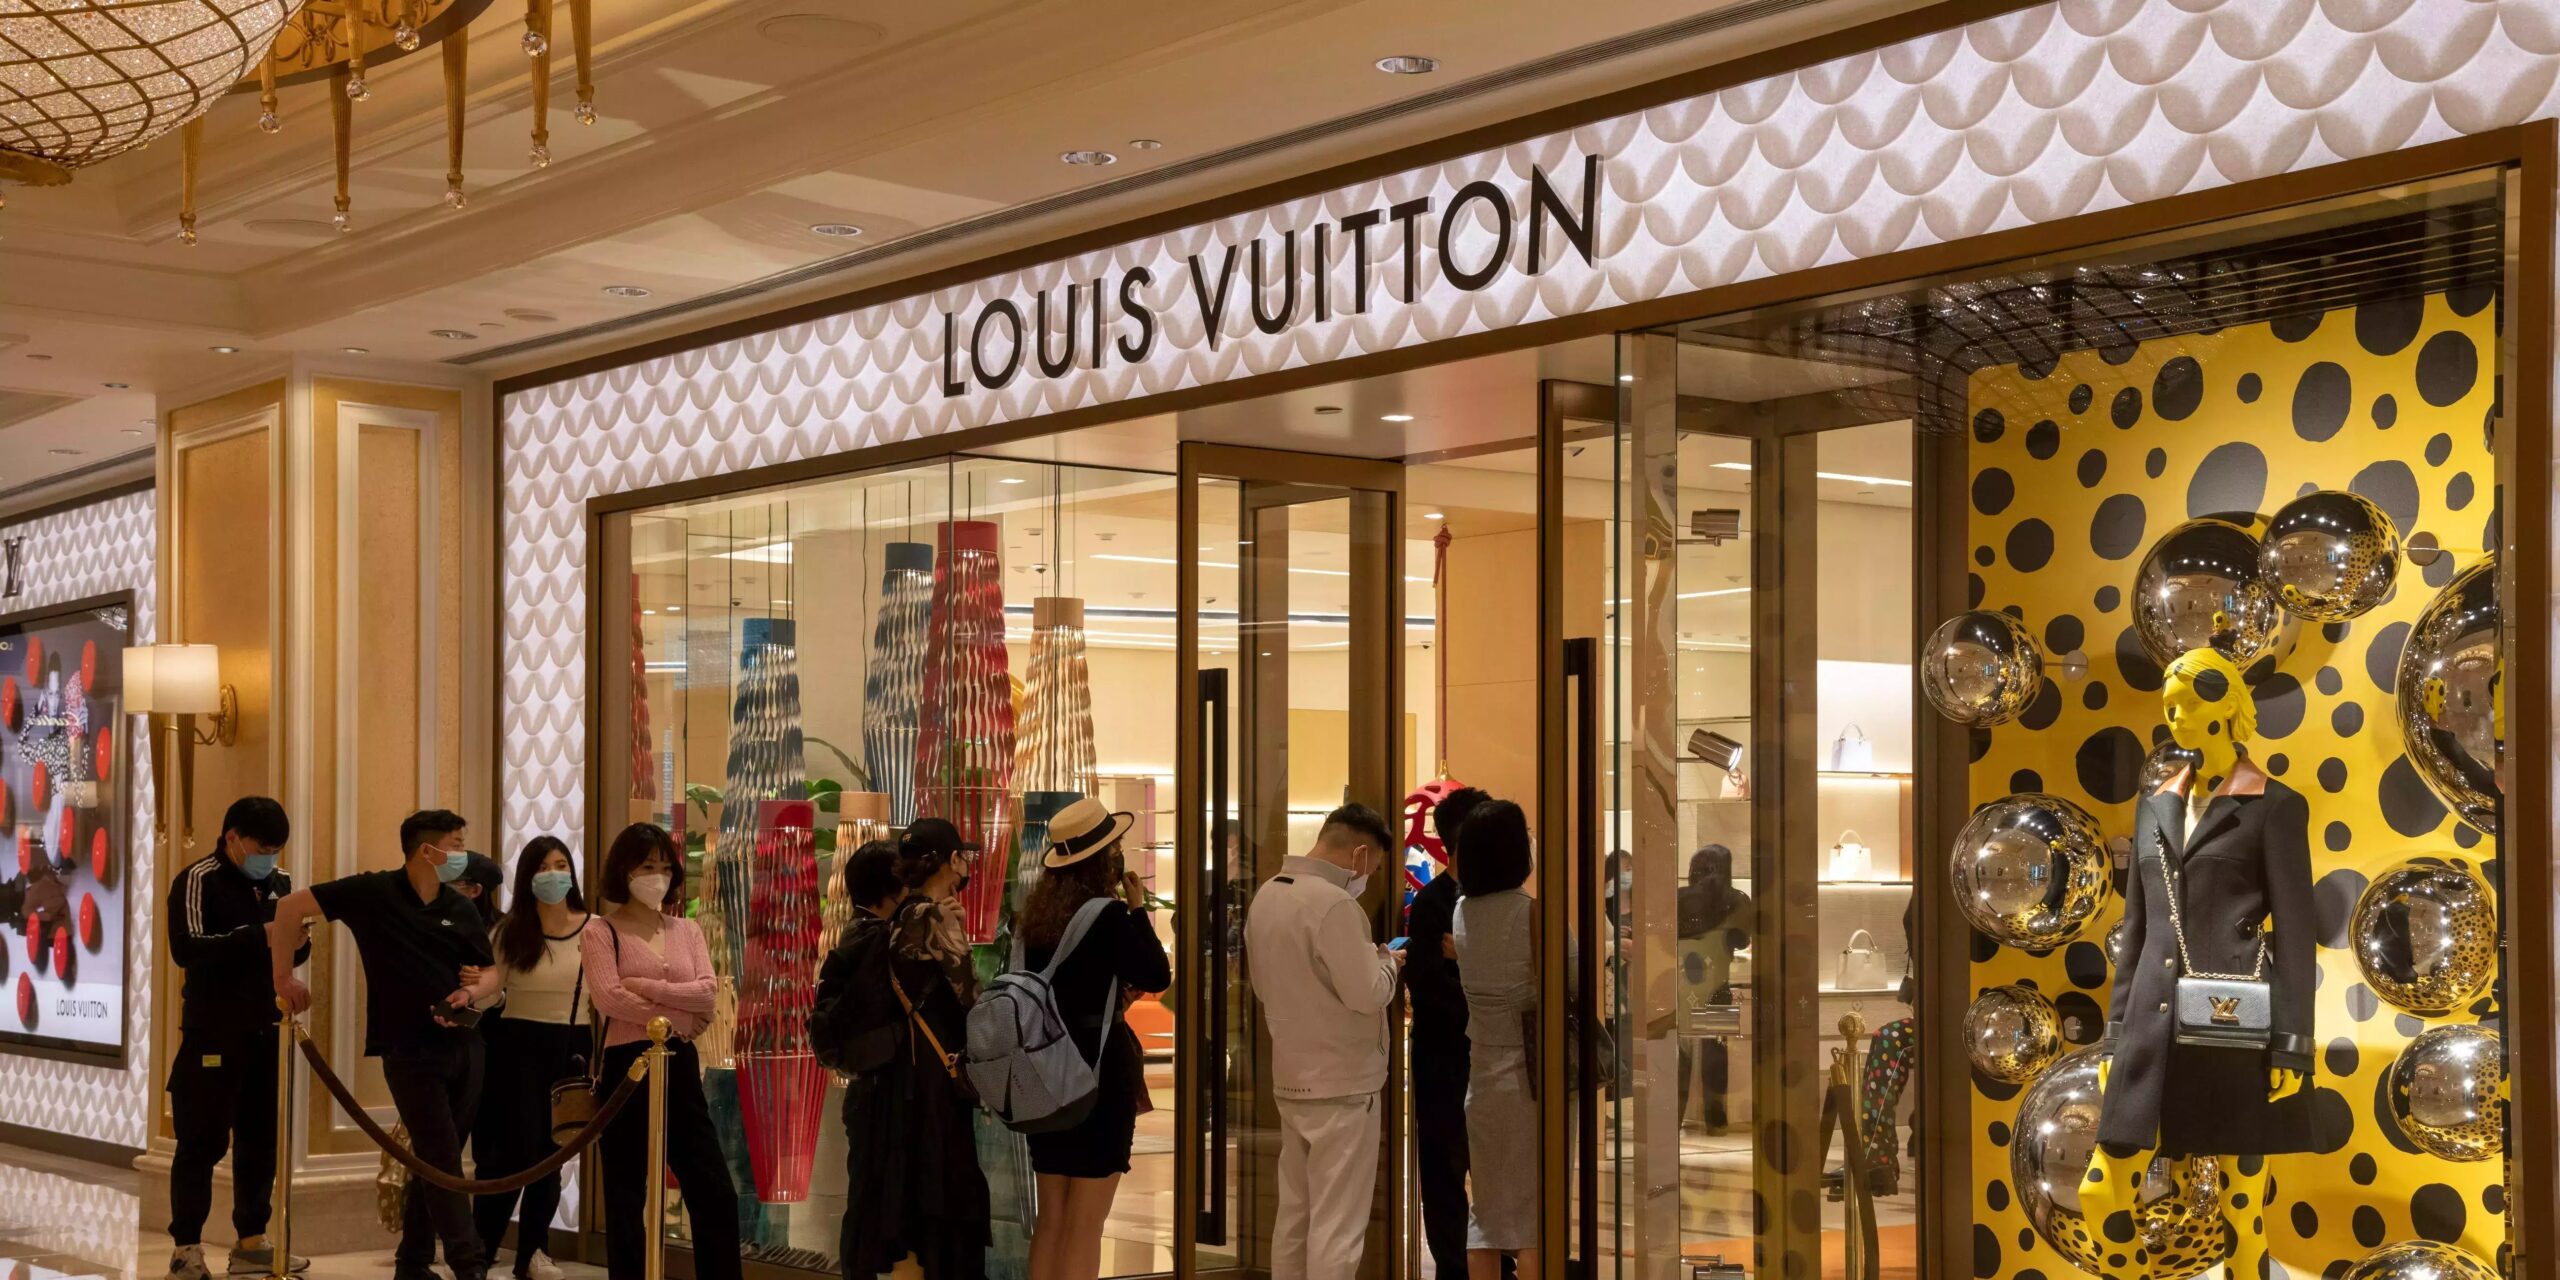 Stocks of luxury brands are falling, a sign that consumers' high-end spending spree is over.